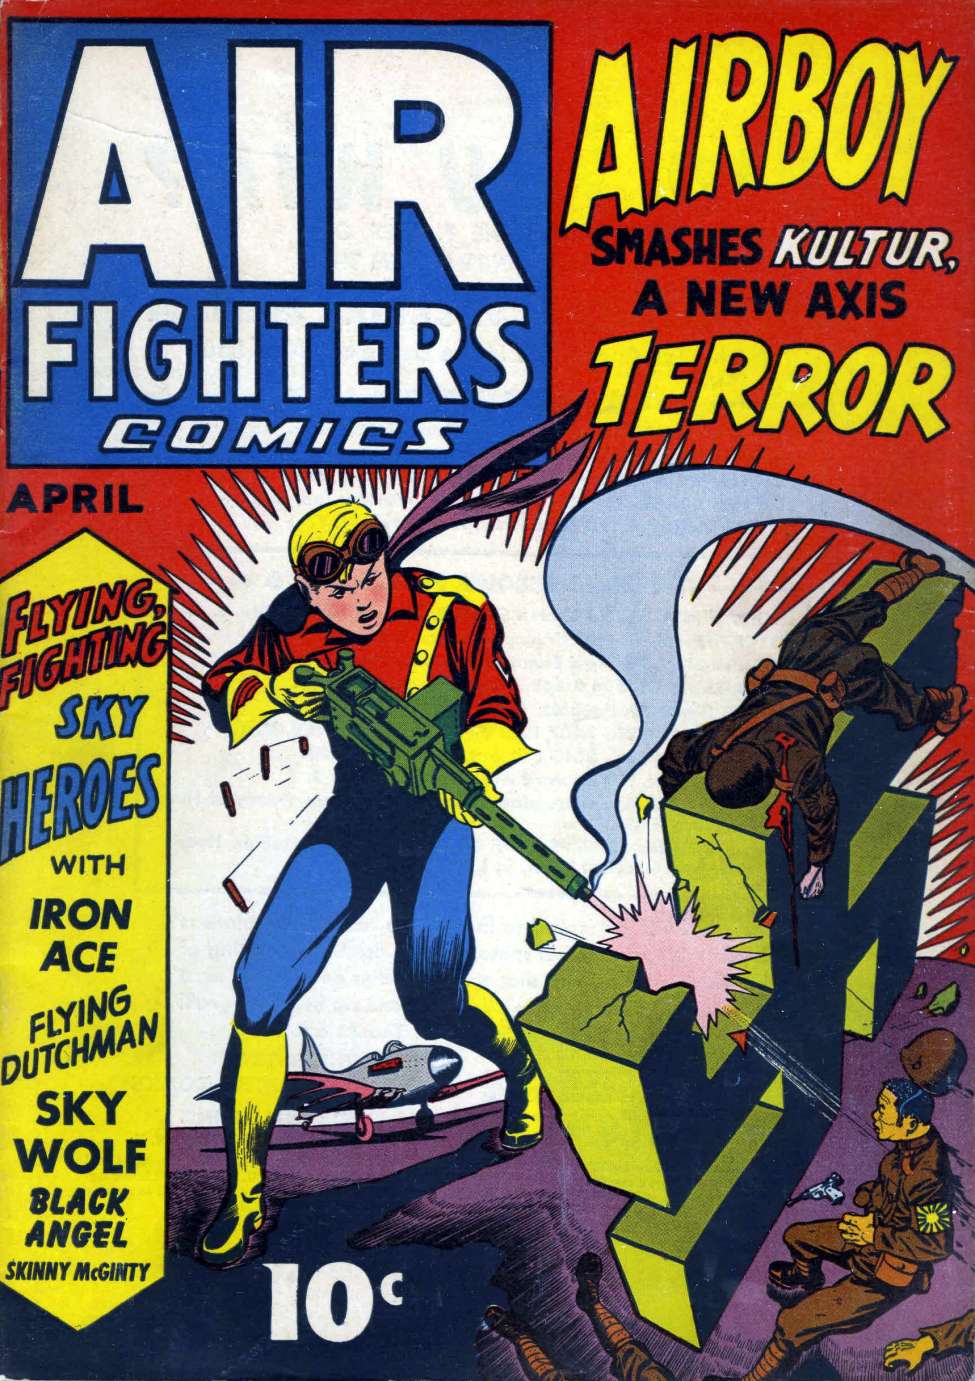 Book Cover For Air Fighters Comics v1 7 (alt) - Version 2